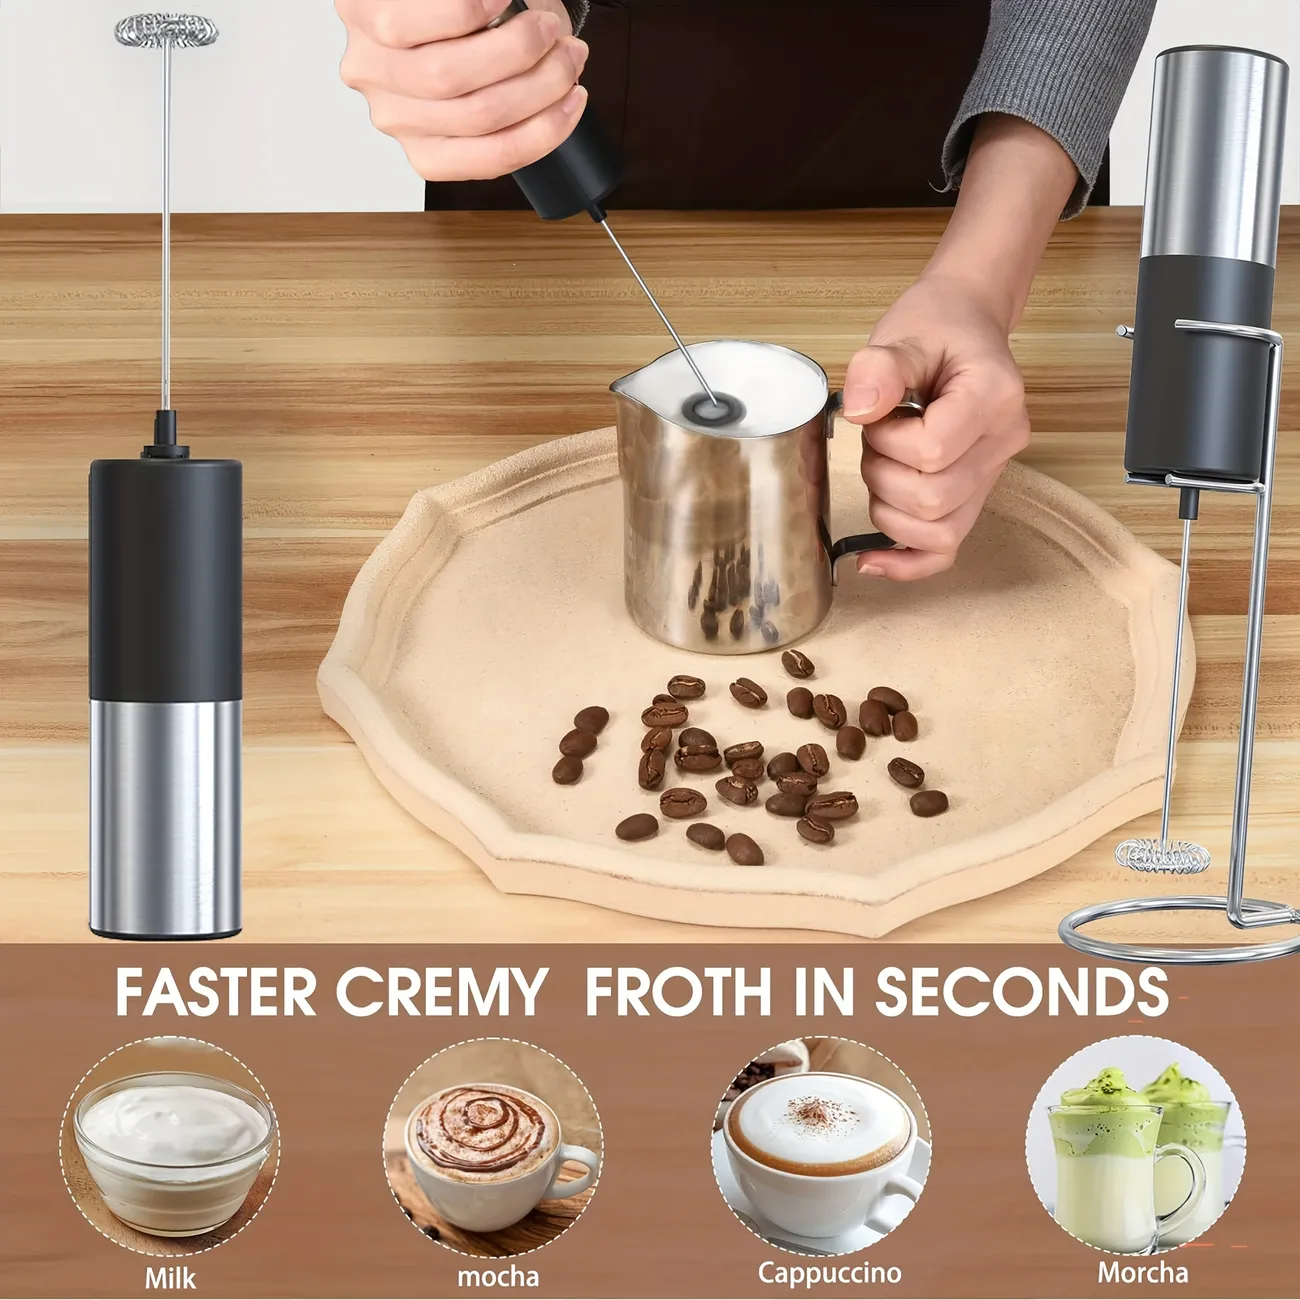 Premium Handheld Electric Milk Frother And Coffee Frother